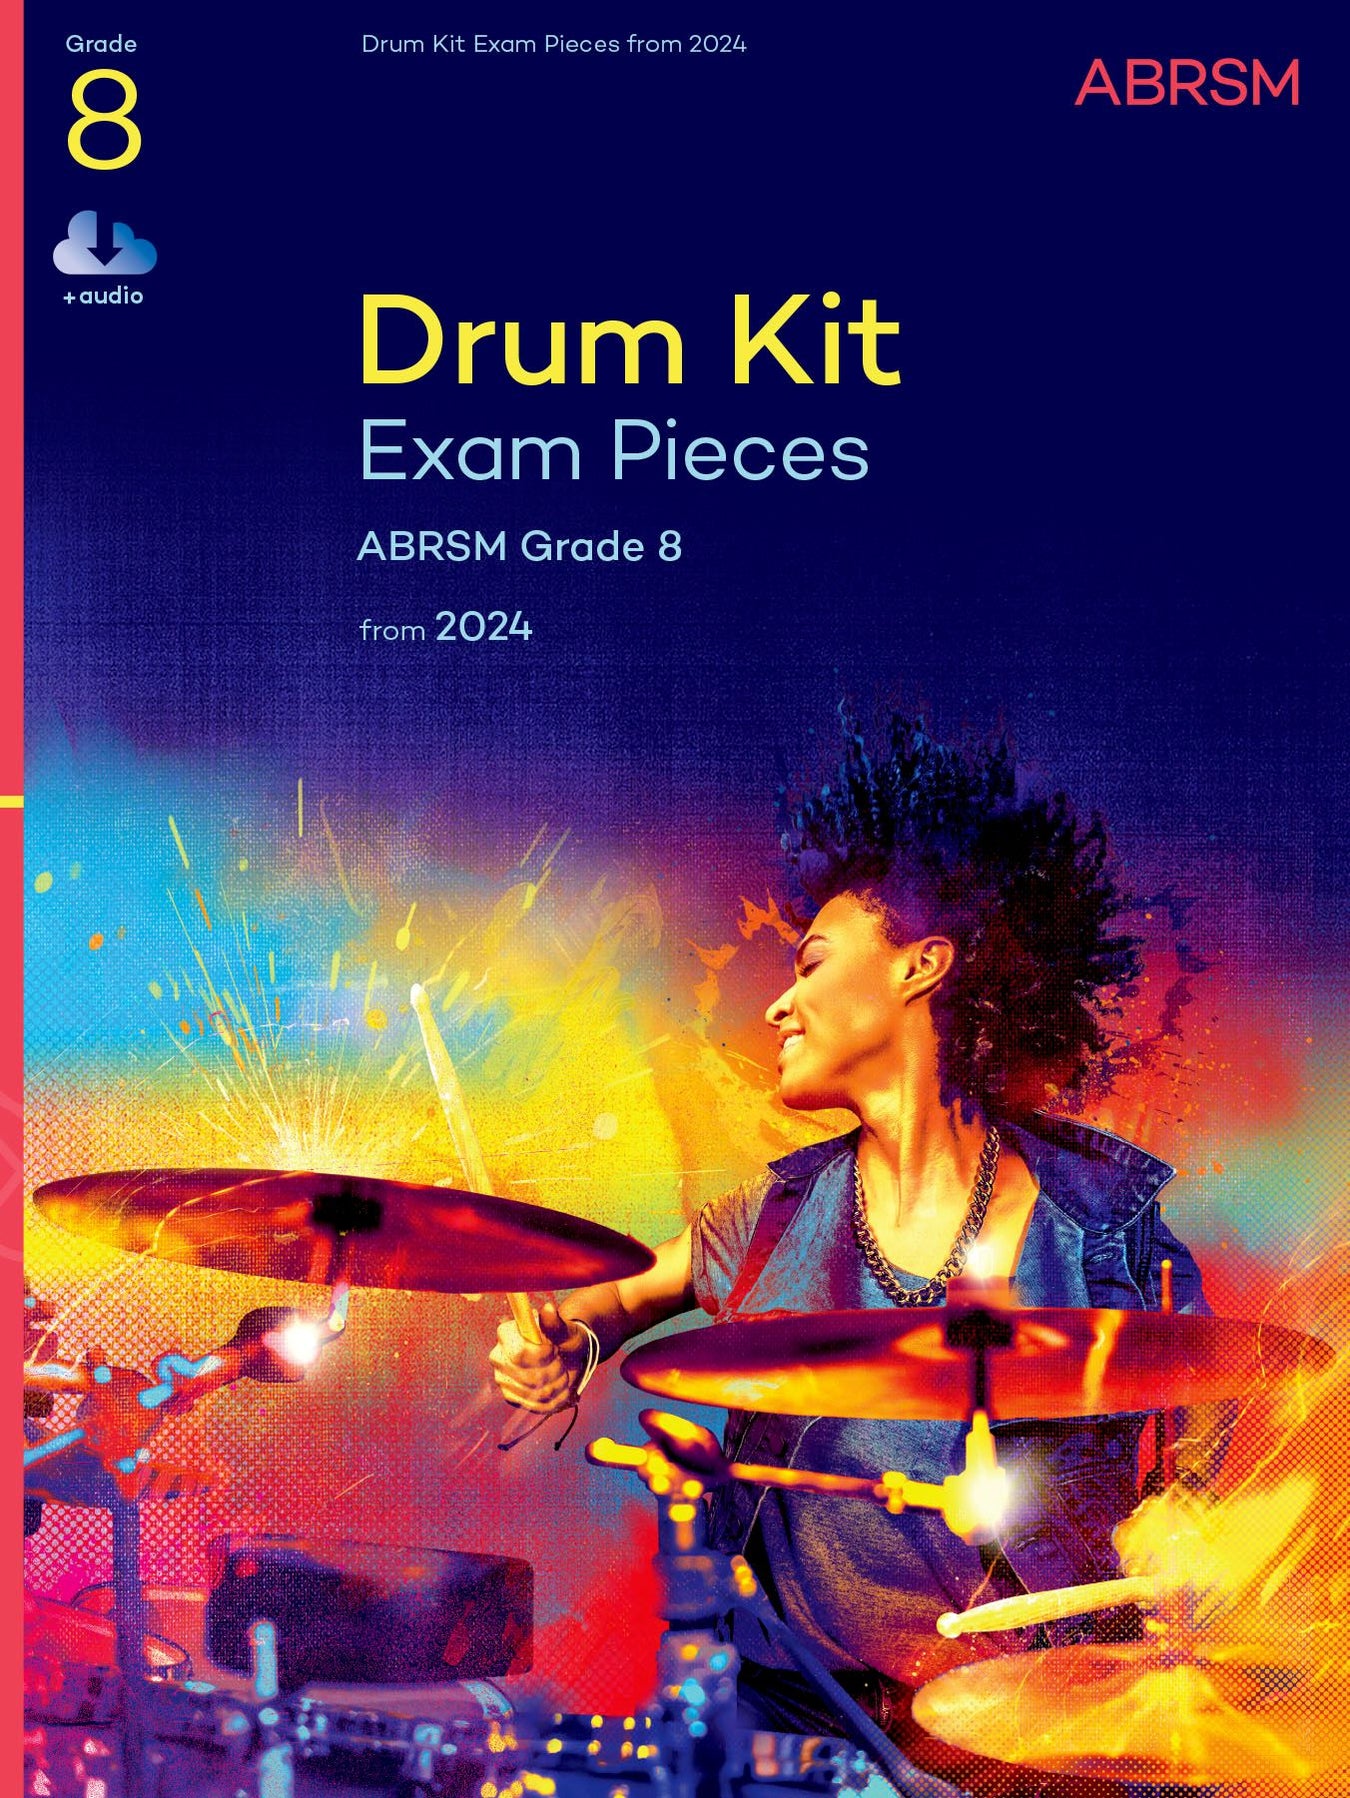 ABRSM Drum Kit Exam Pieces from 2024